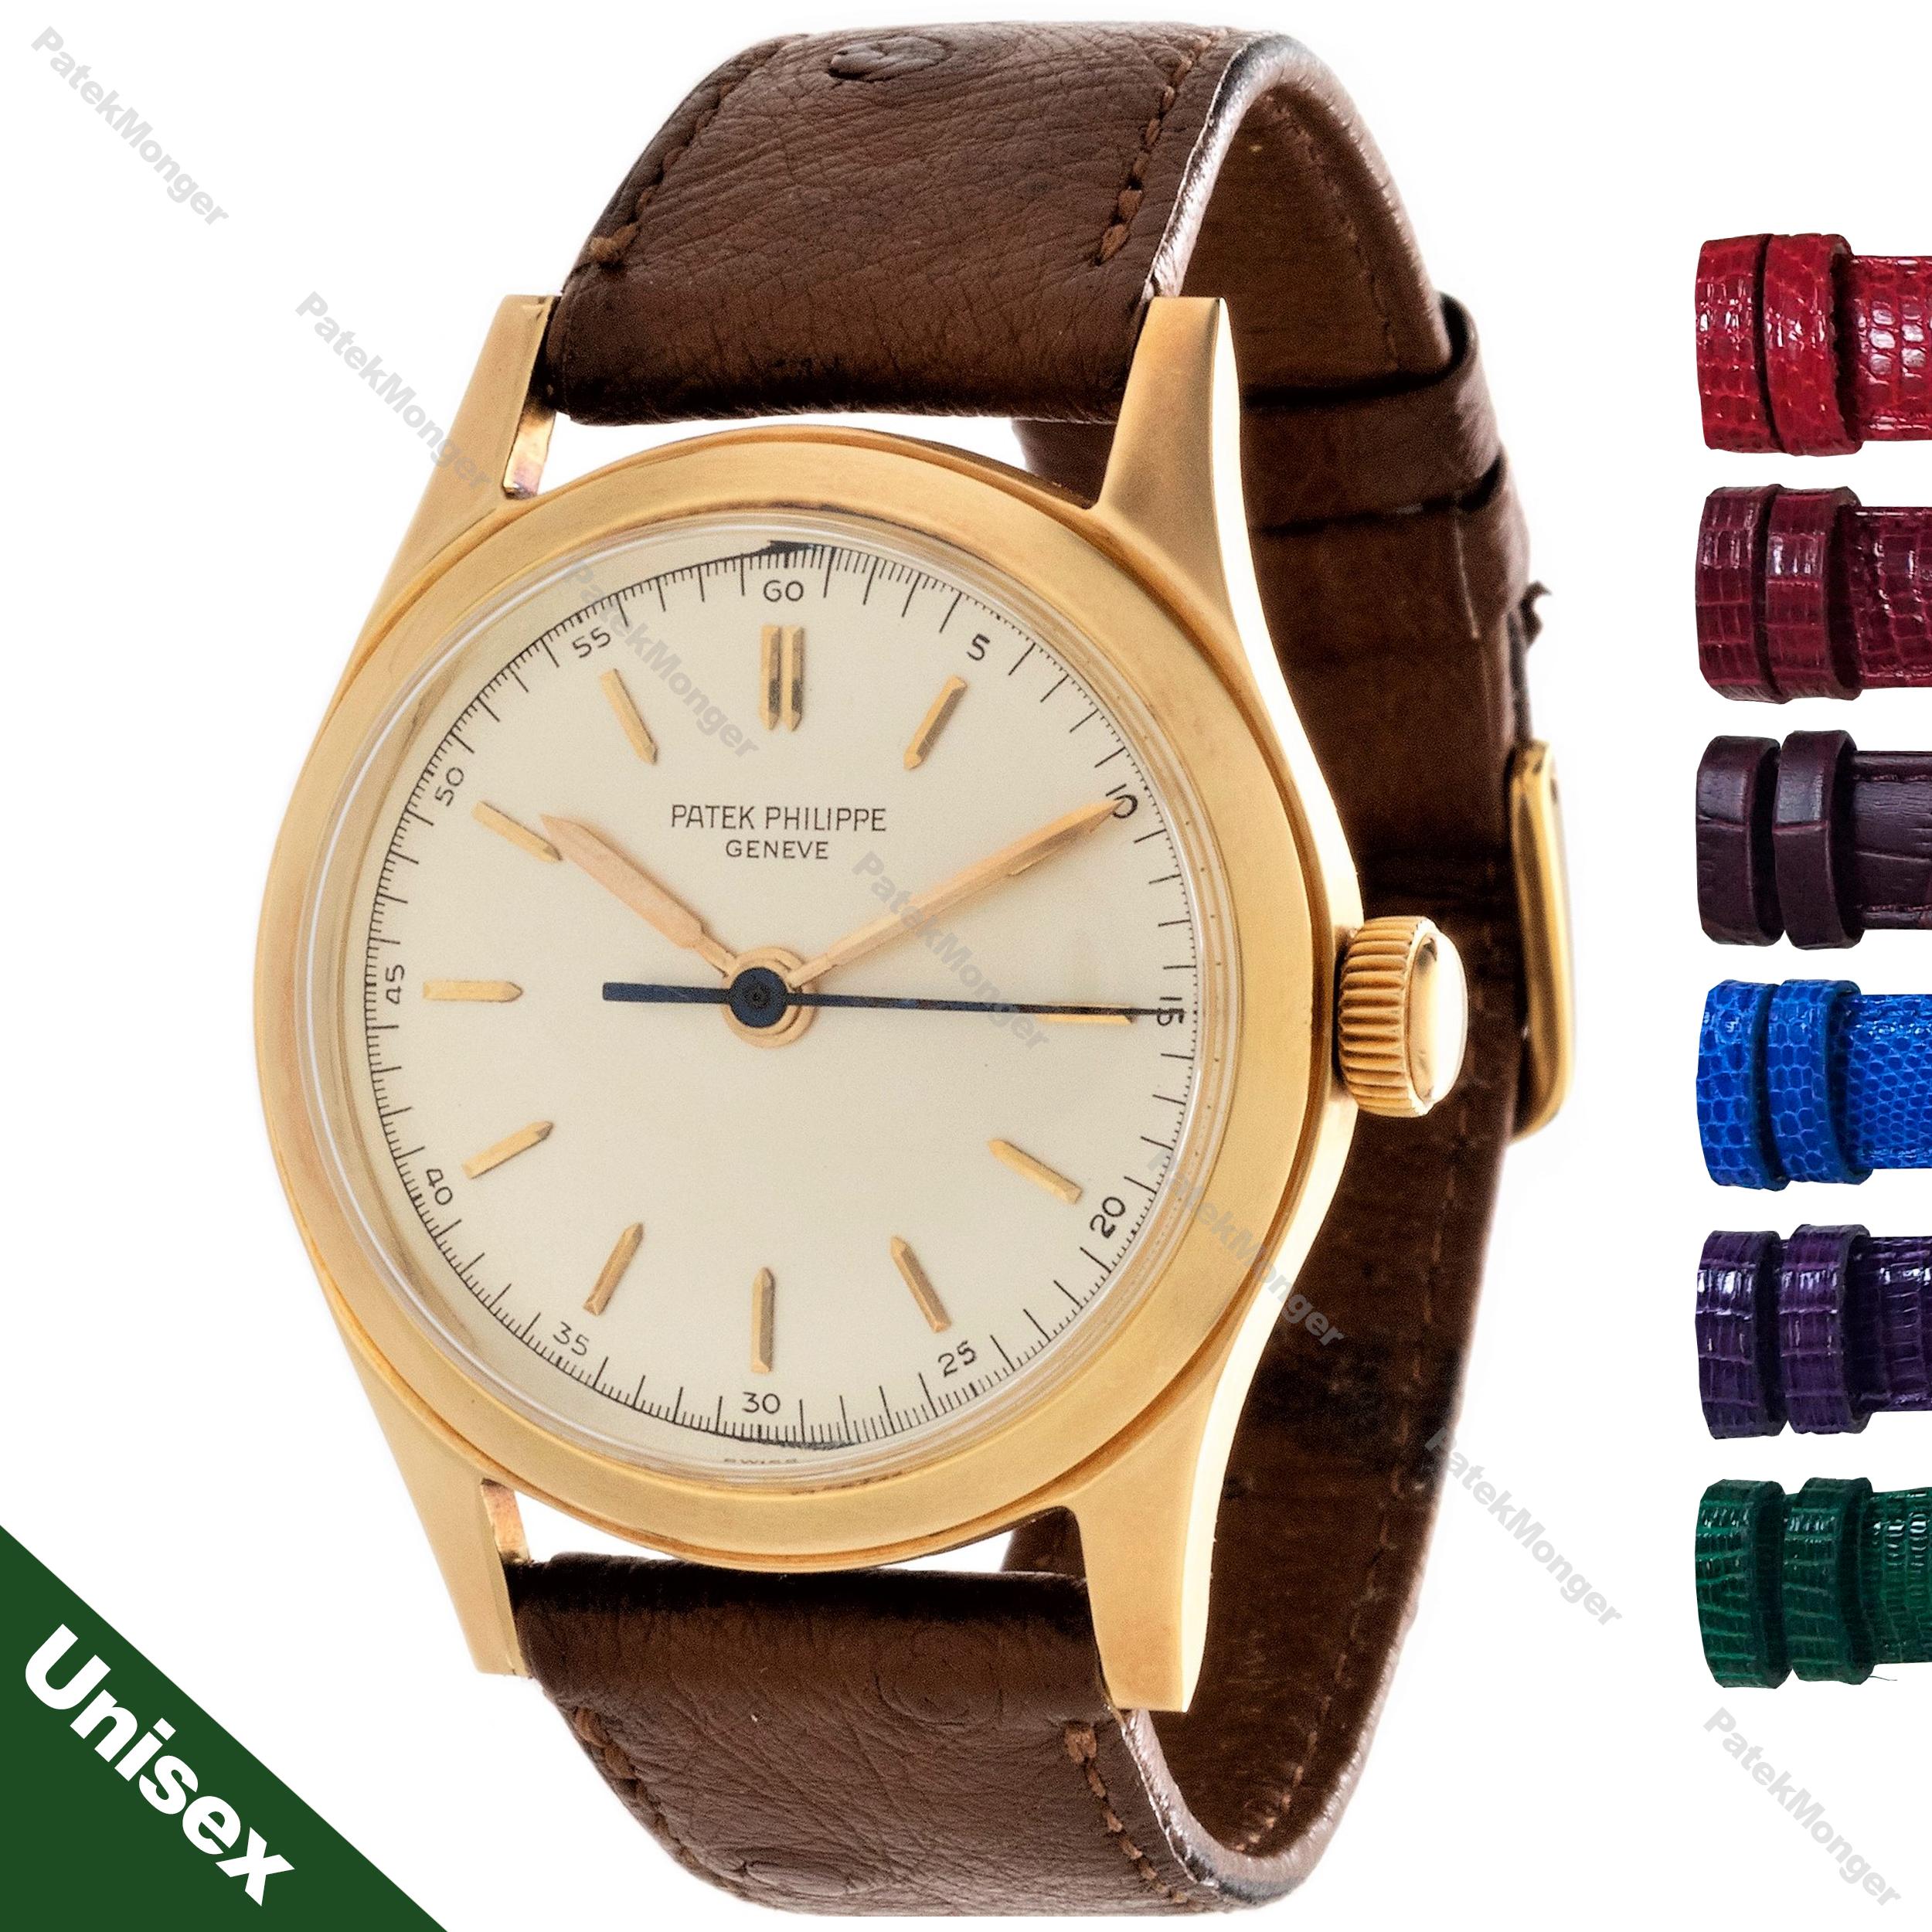 Introduction:
This Patek Philippe 2483J 33mm Calatrava watch features a center sweep second hand, water resistant case, 27 SC caliber movement #701987 and 18K yellow gold case #674861.  Multiple strap options are available.

Date & Paperwork: 
The